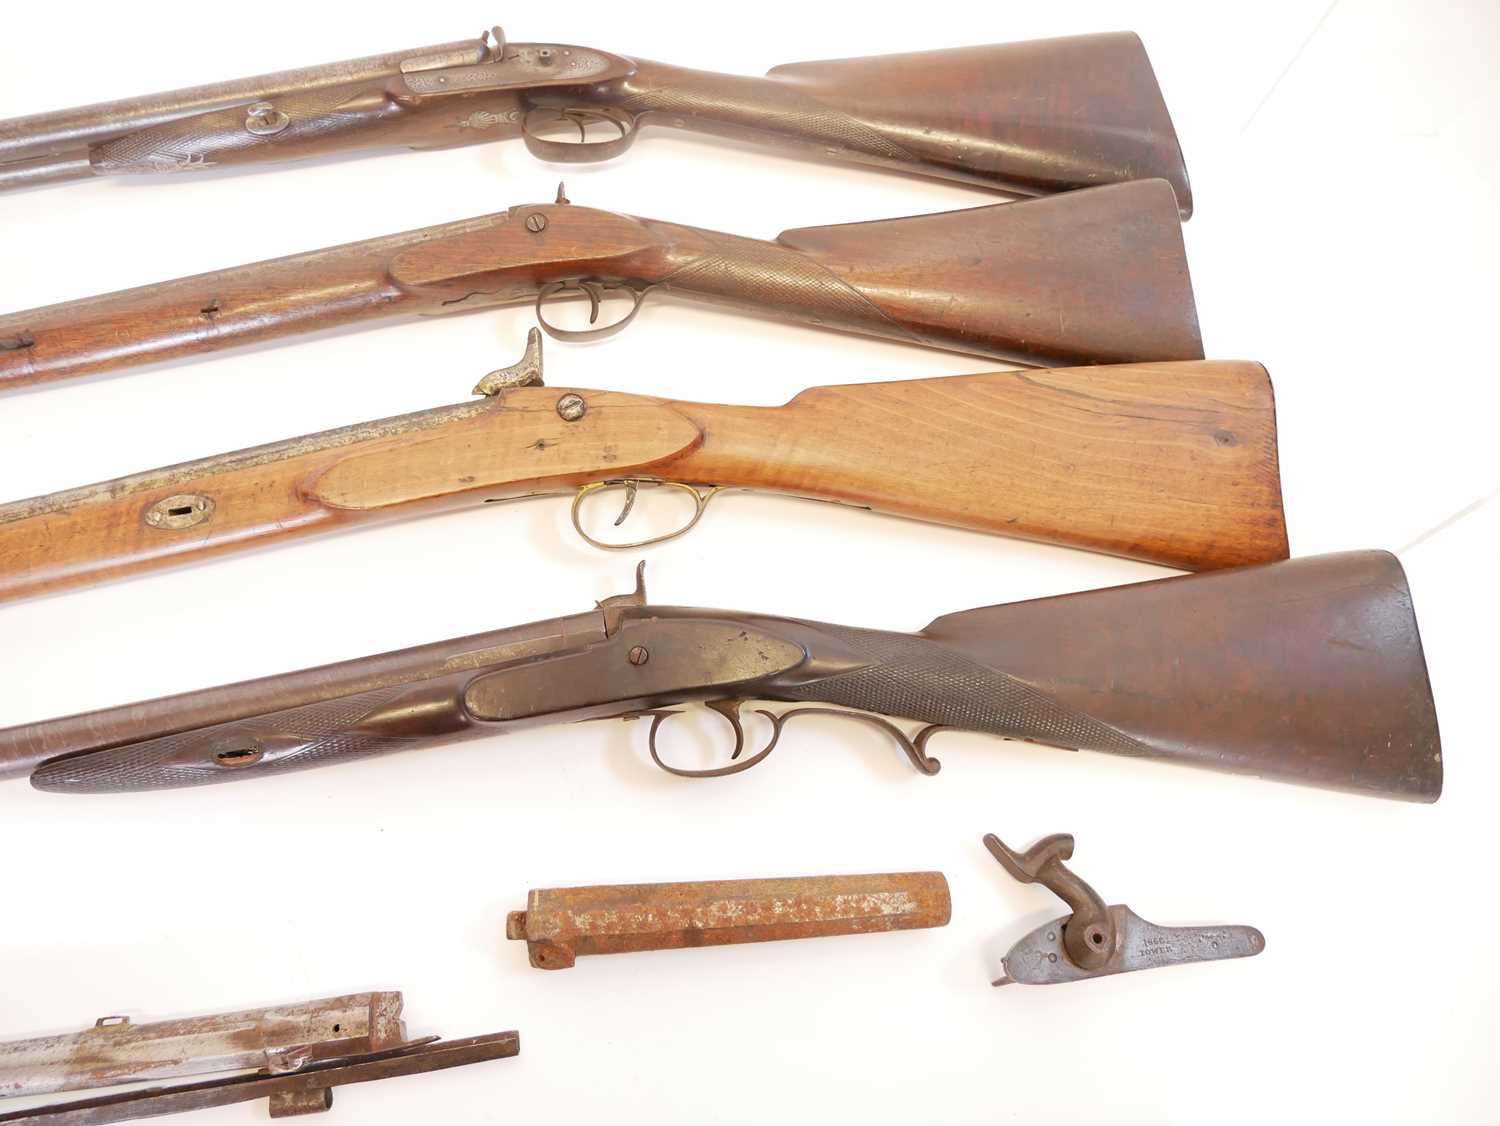 Four percussion shotguns for restoration, one a double barrel, the other three single barrels one by - Image 11 of 21